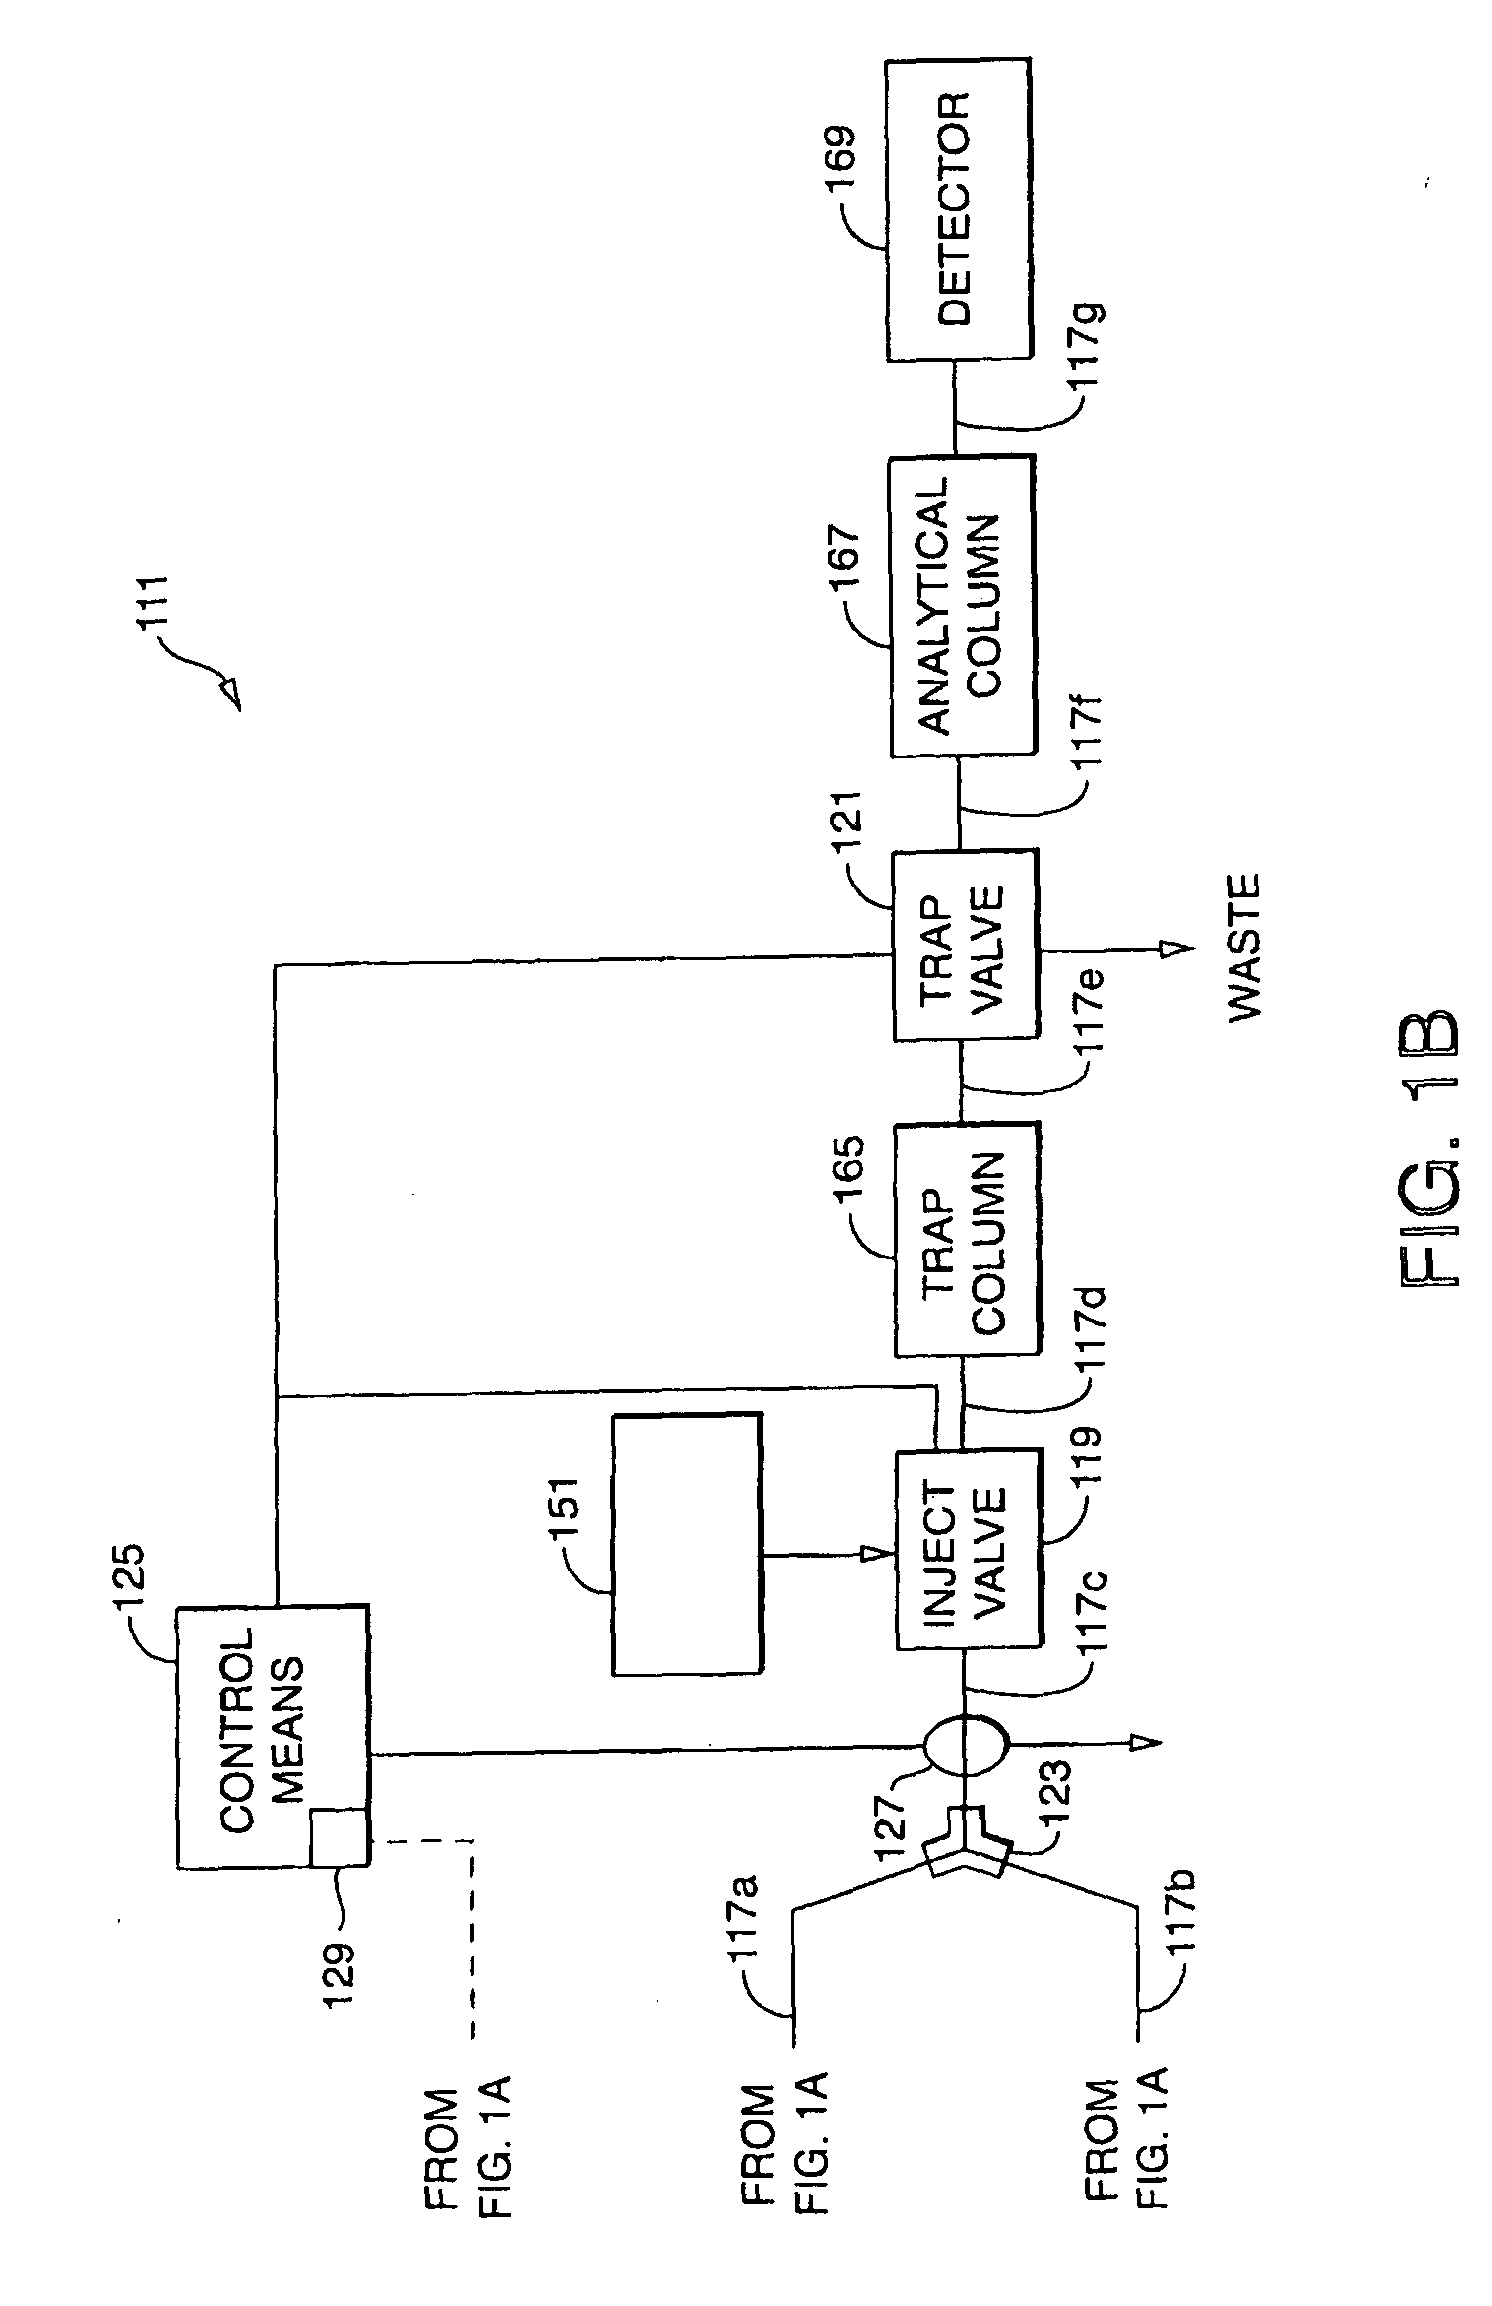 Solvent delivery system for liquid chromatography that maintains fluid integrity and pre-forms gradients